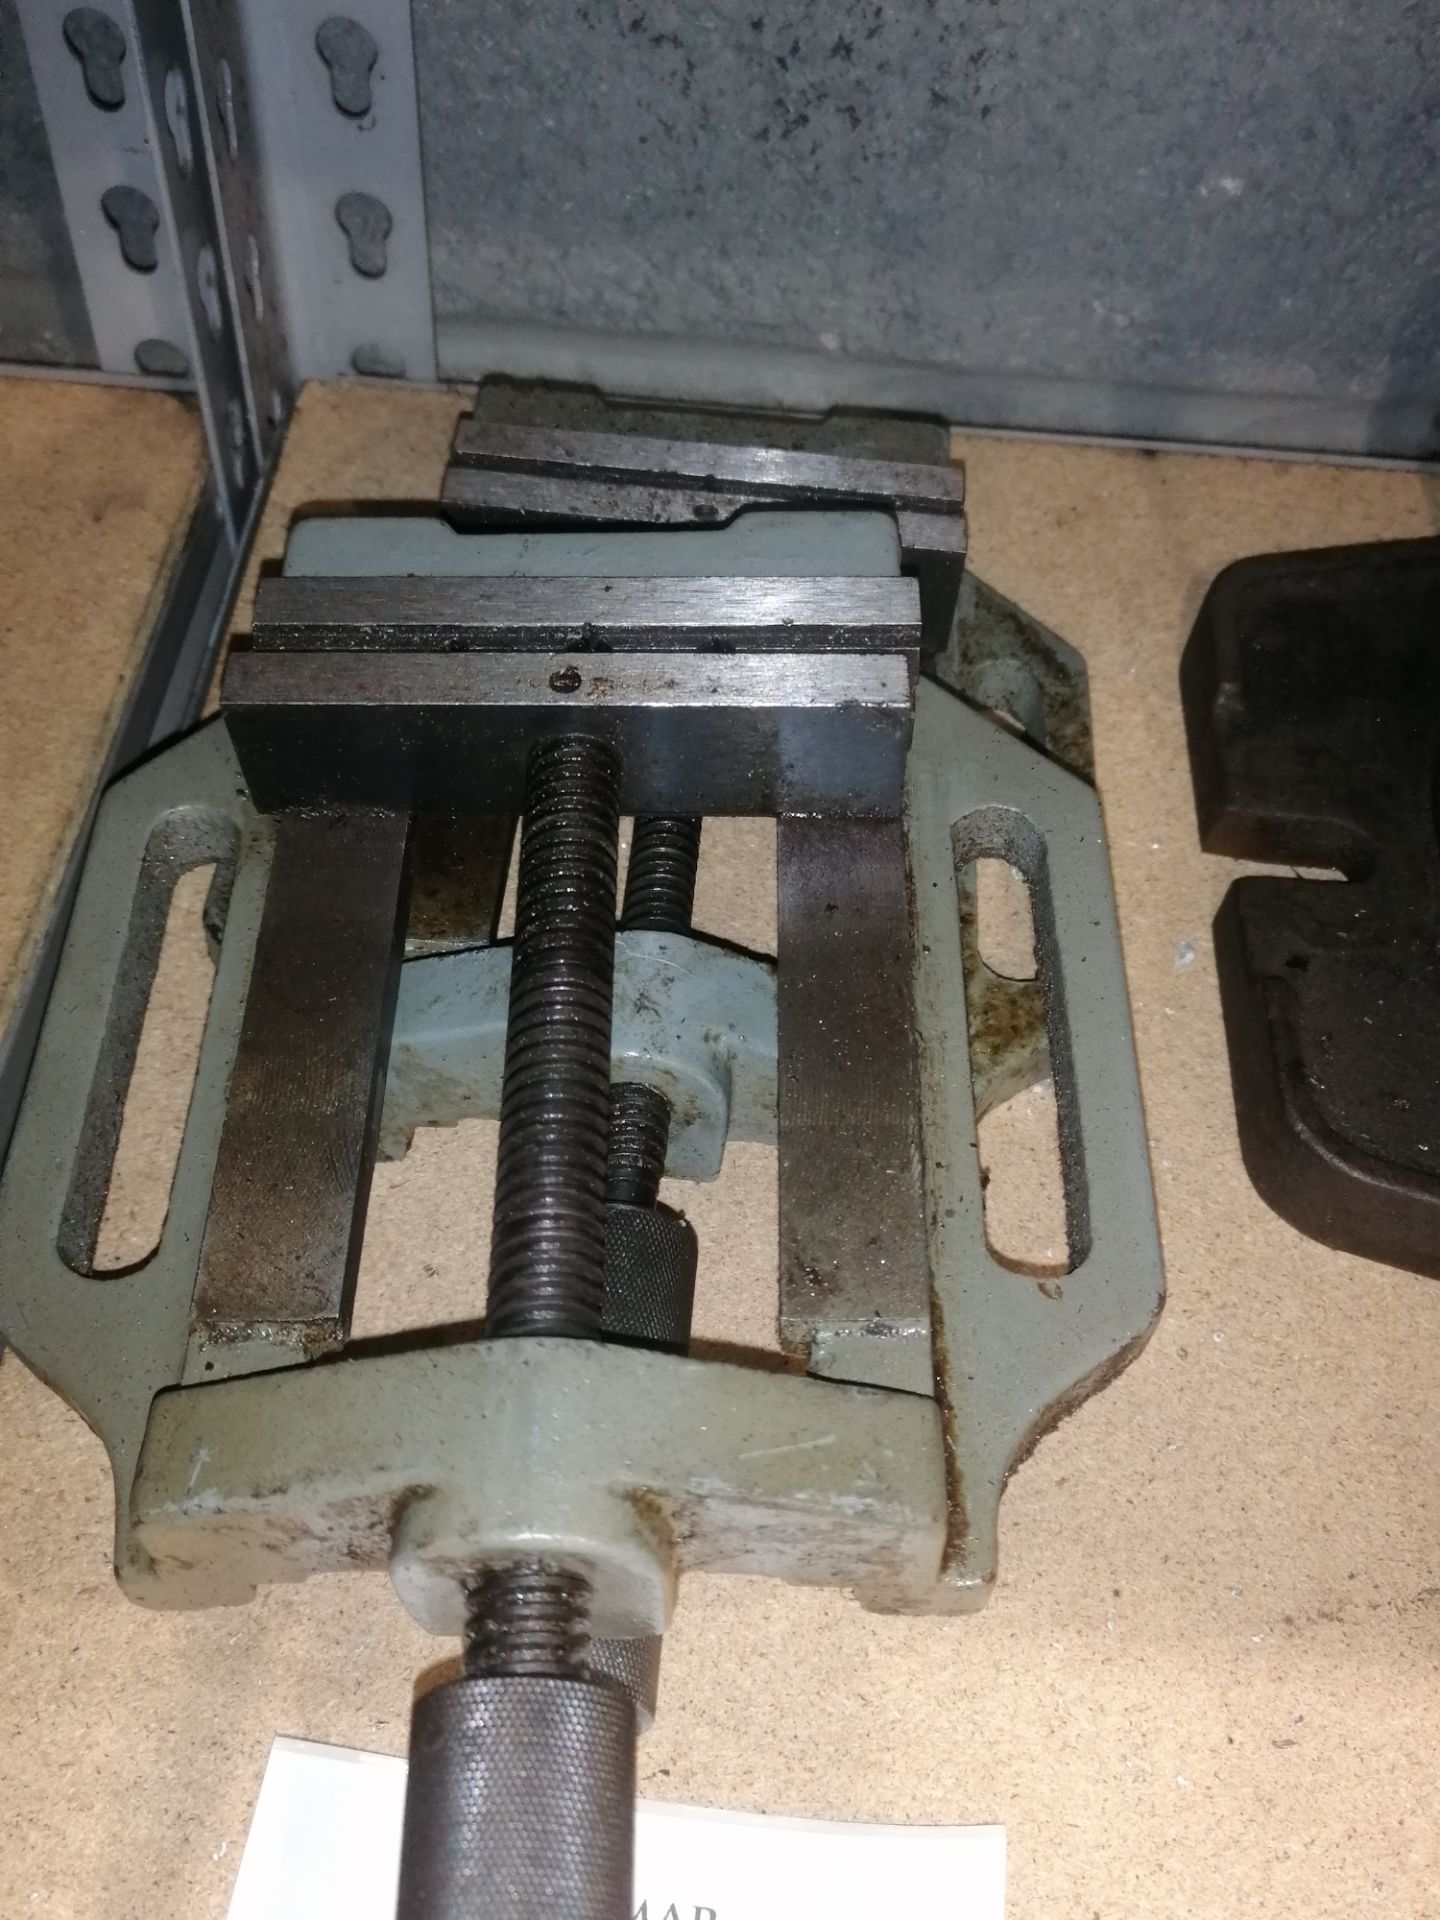 2: Vice Clamps 4" x 4" Clamping